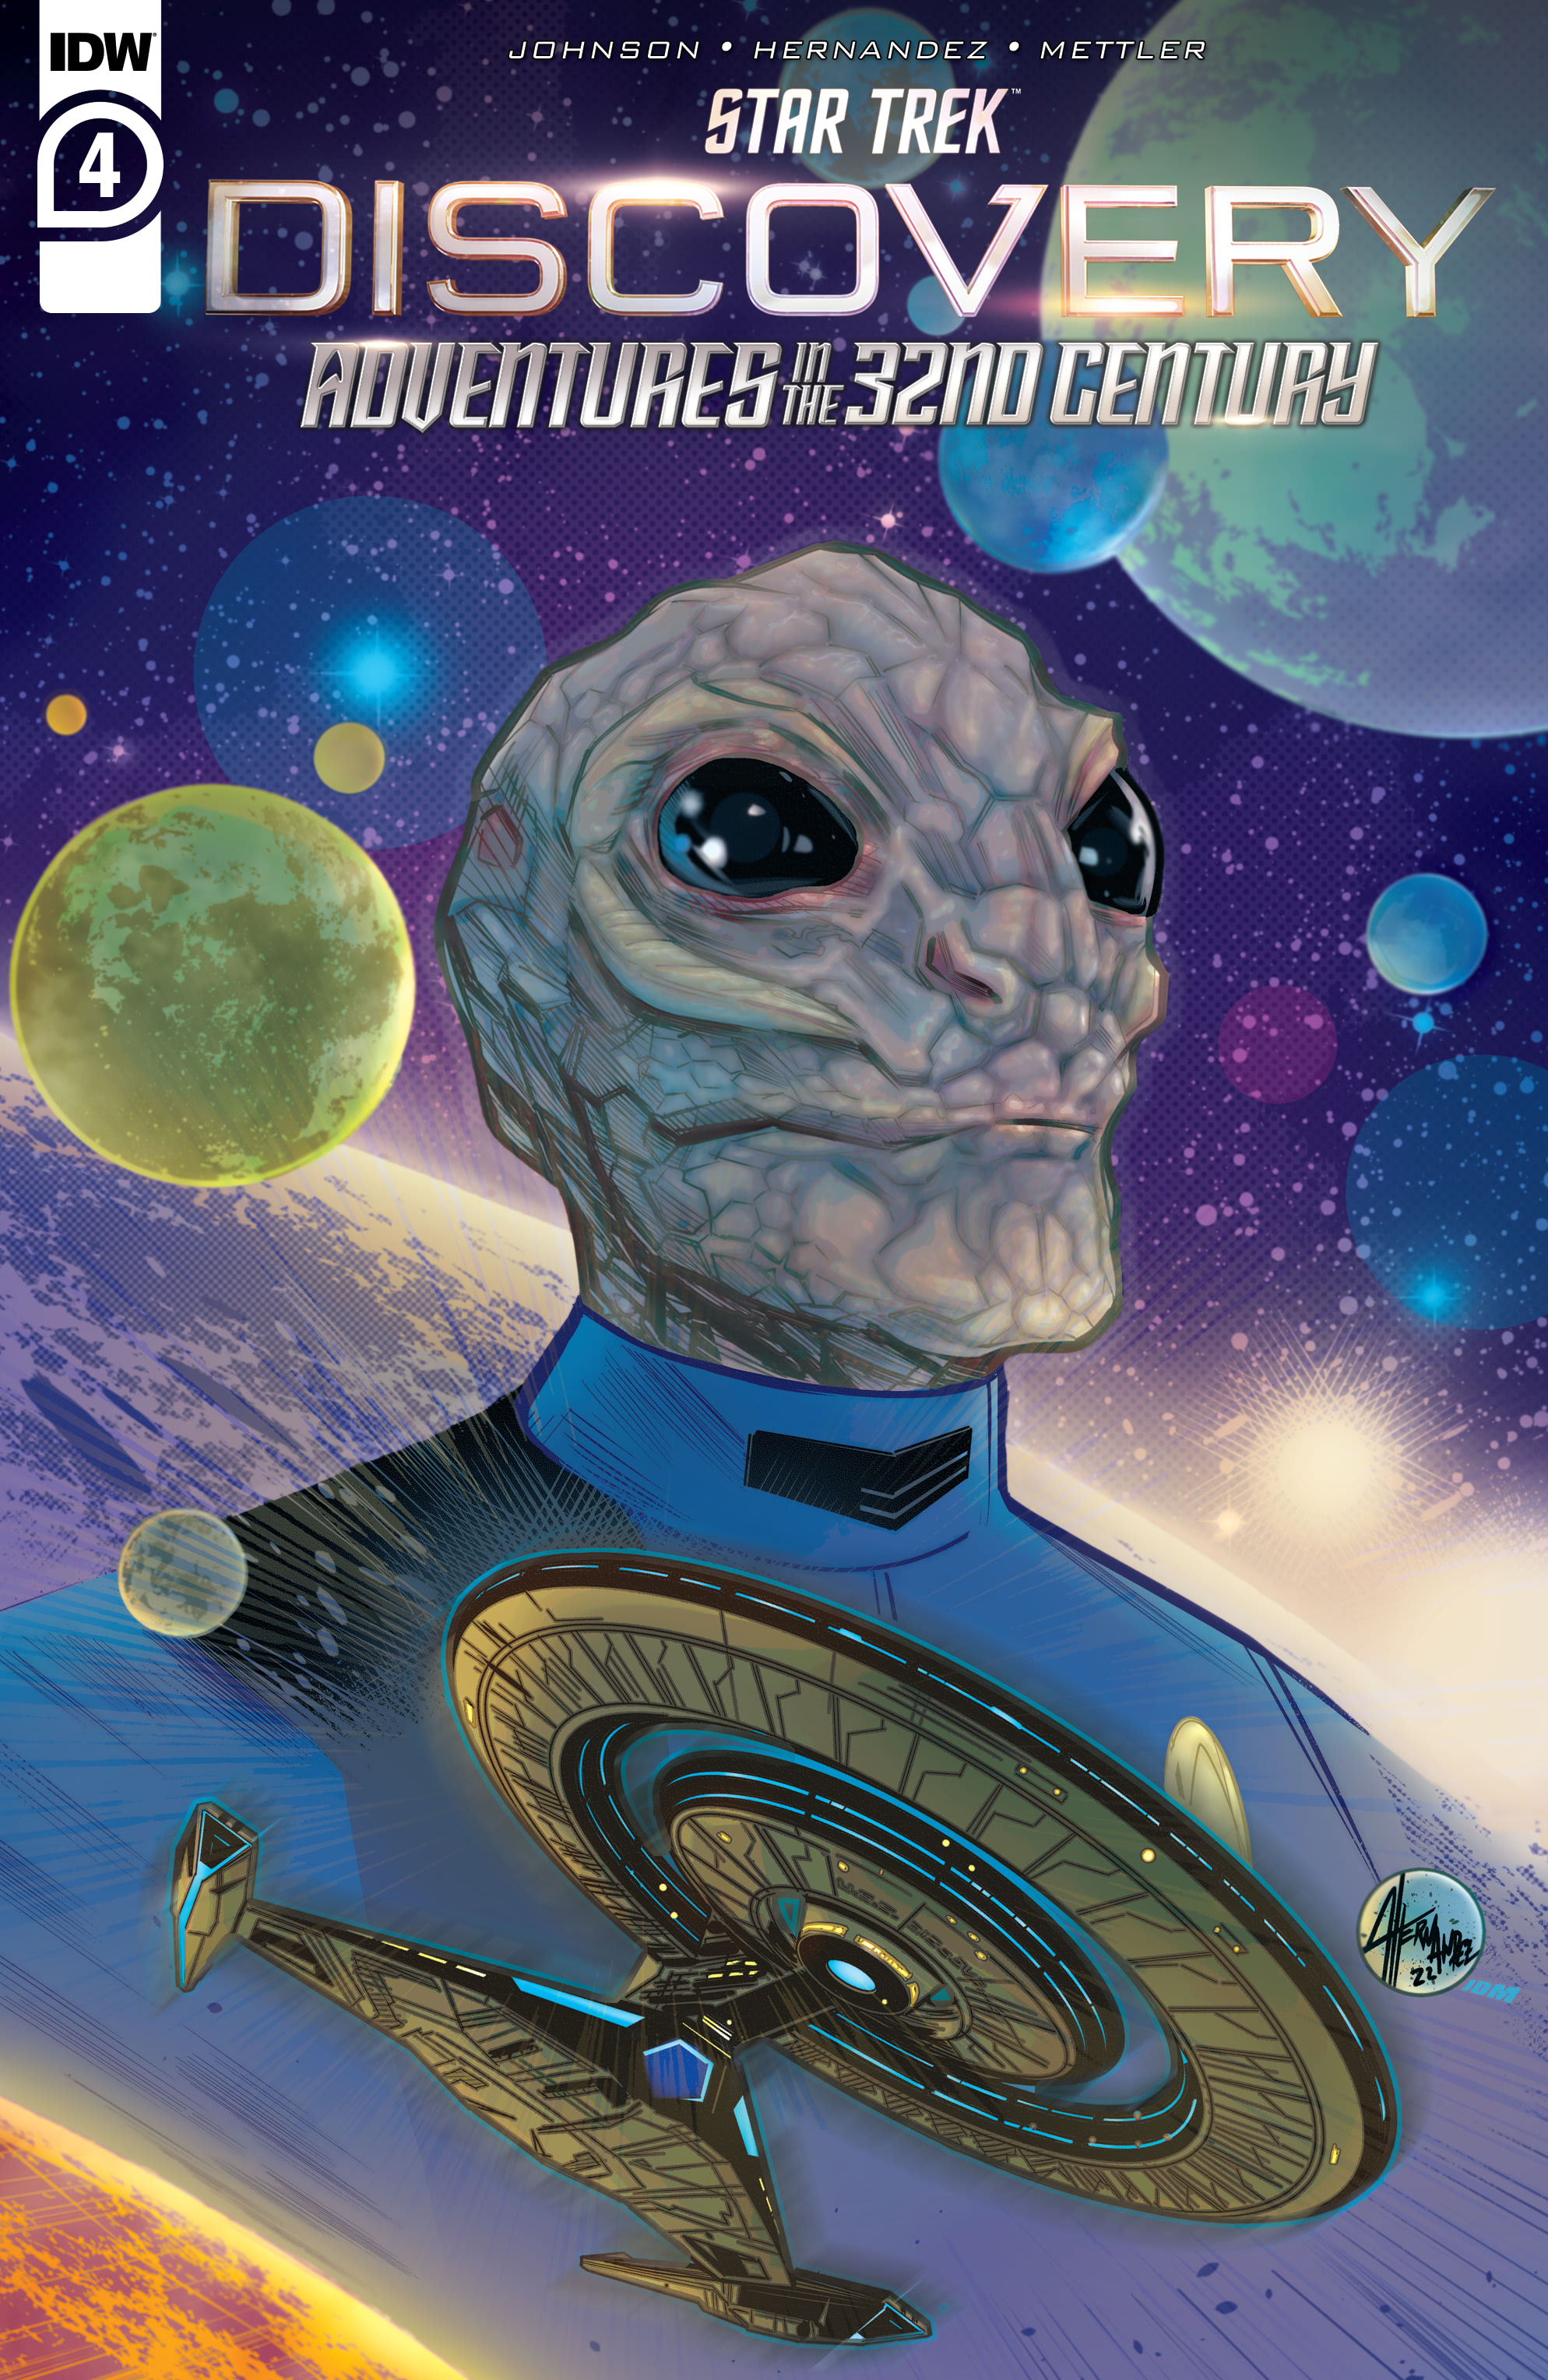 Read online Star Trek: Discovery - Adventures in the 32nd Century comic -  Issue #4 - 1